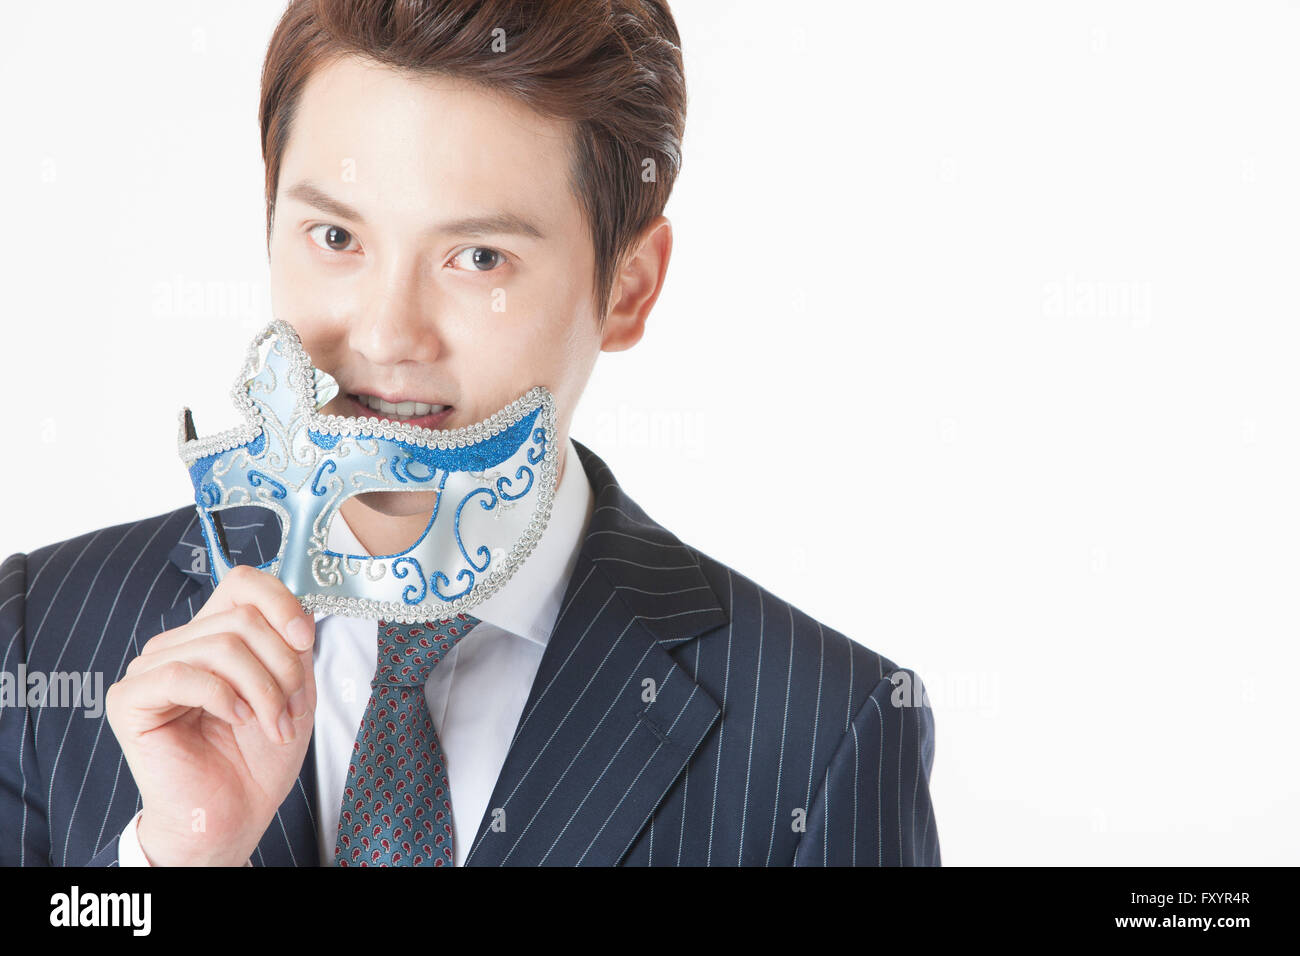 Portrait of young smiling man with a mask staring at front Stock Photo